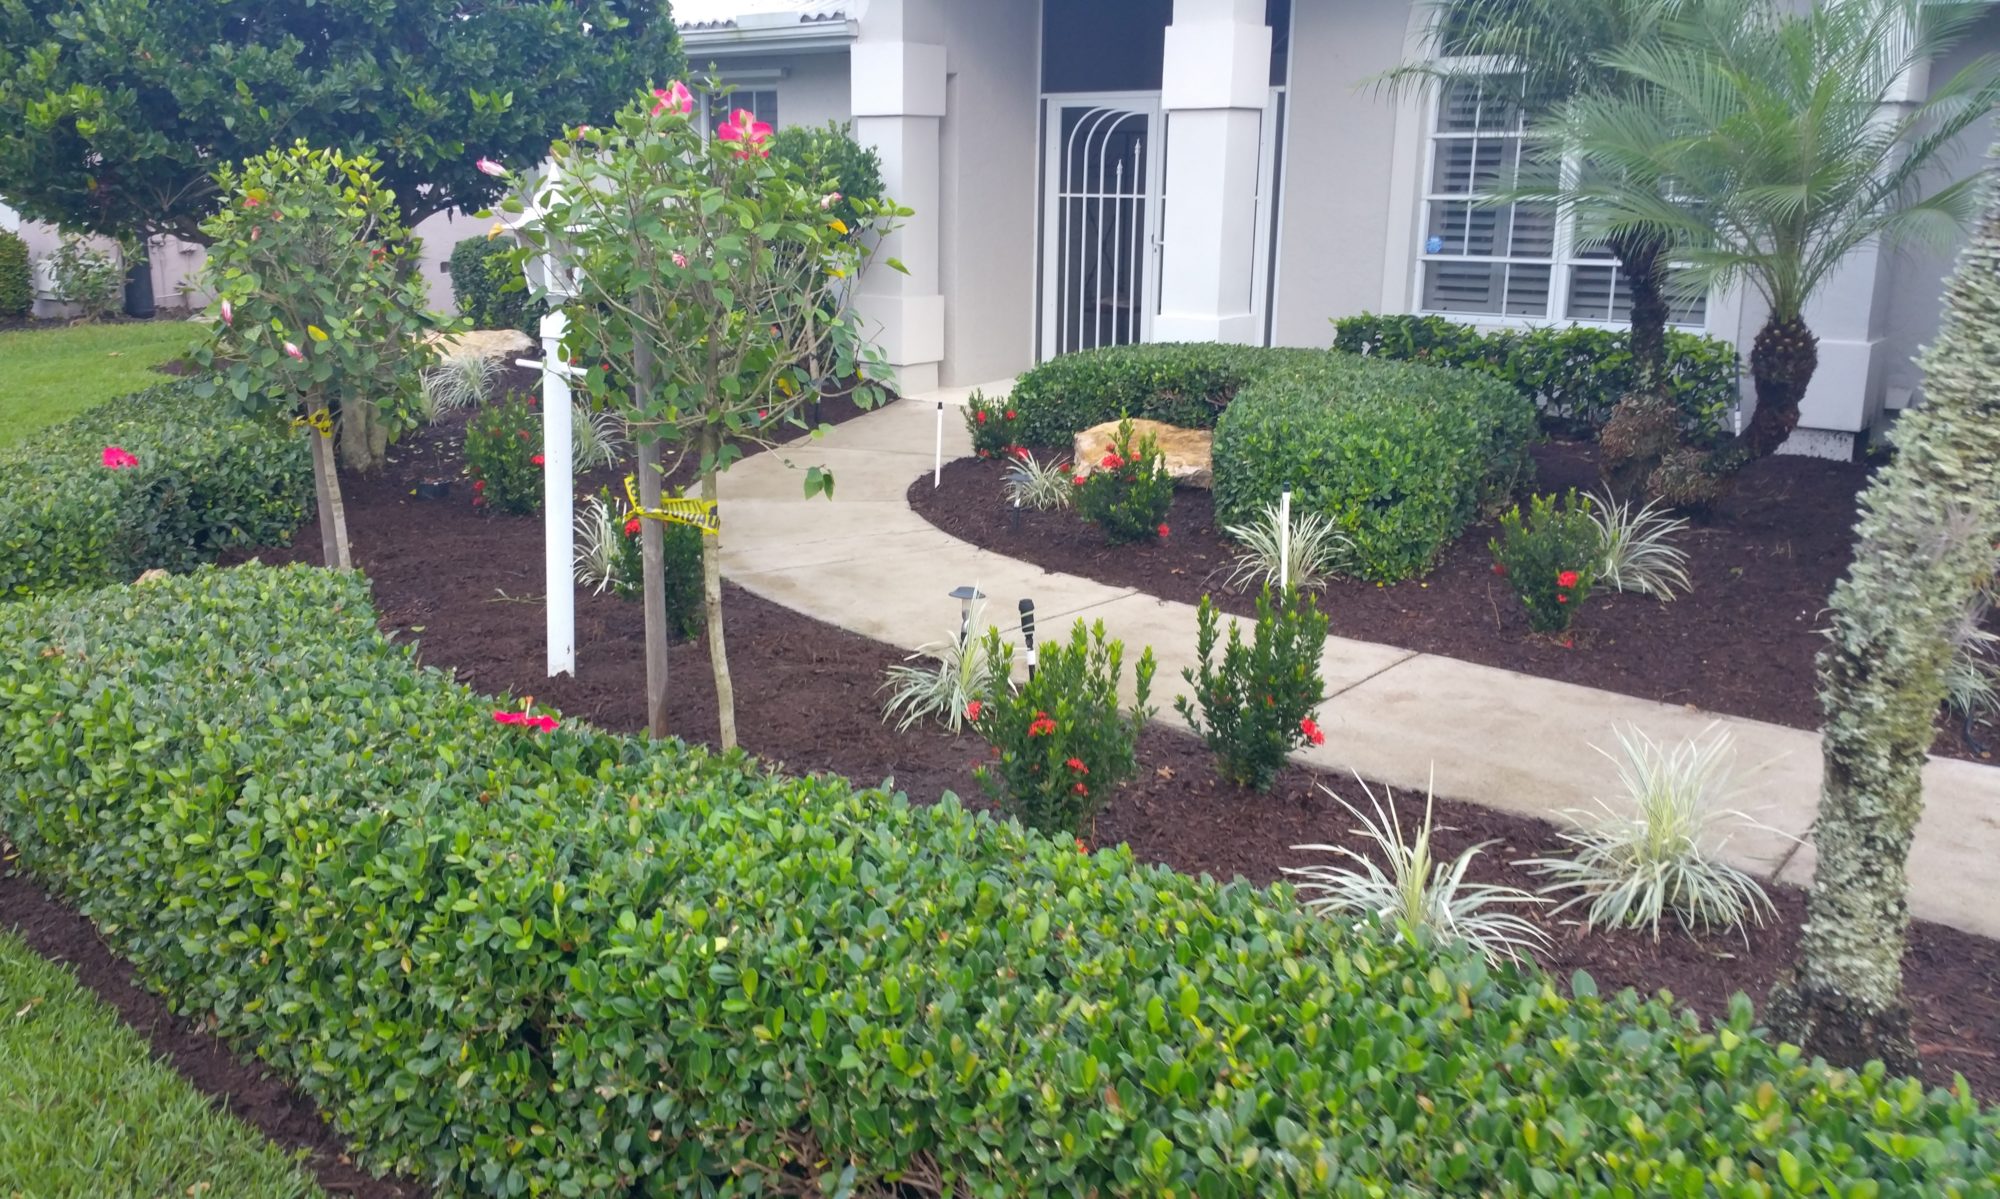 Aunt Bees Lawn Care Services in Venice FL